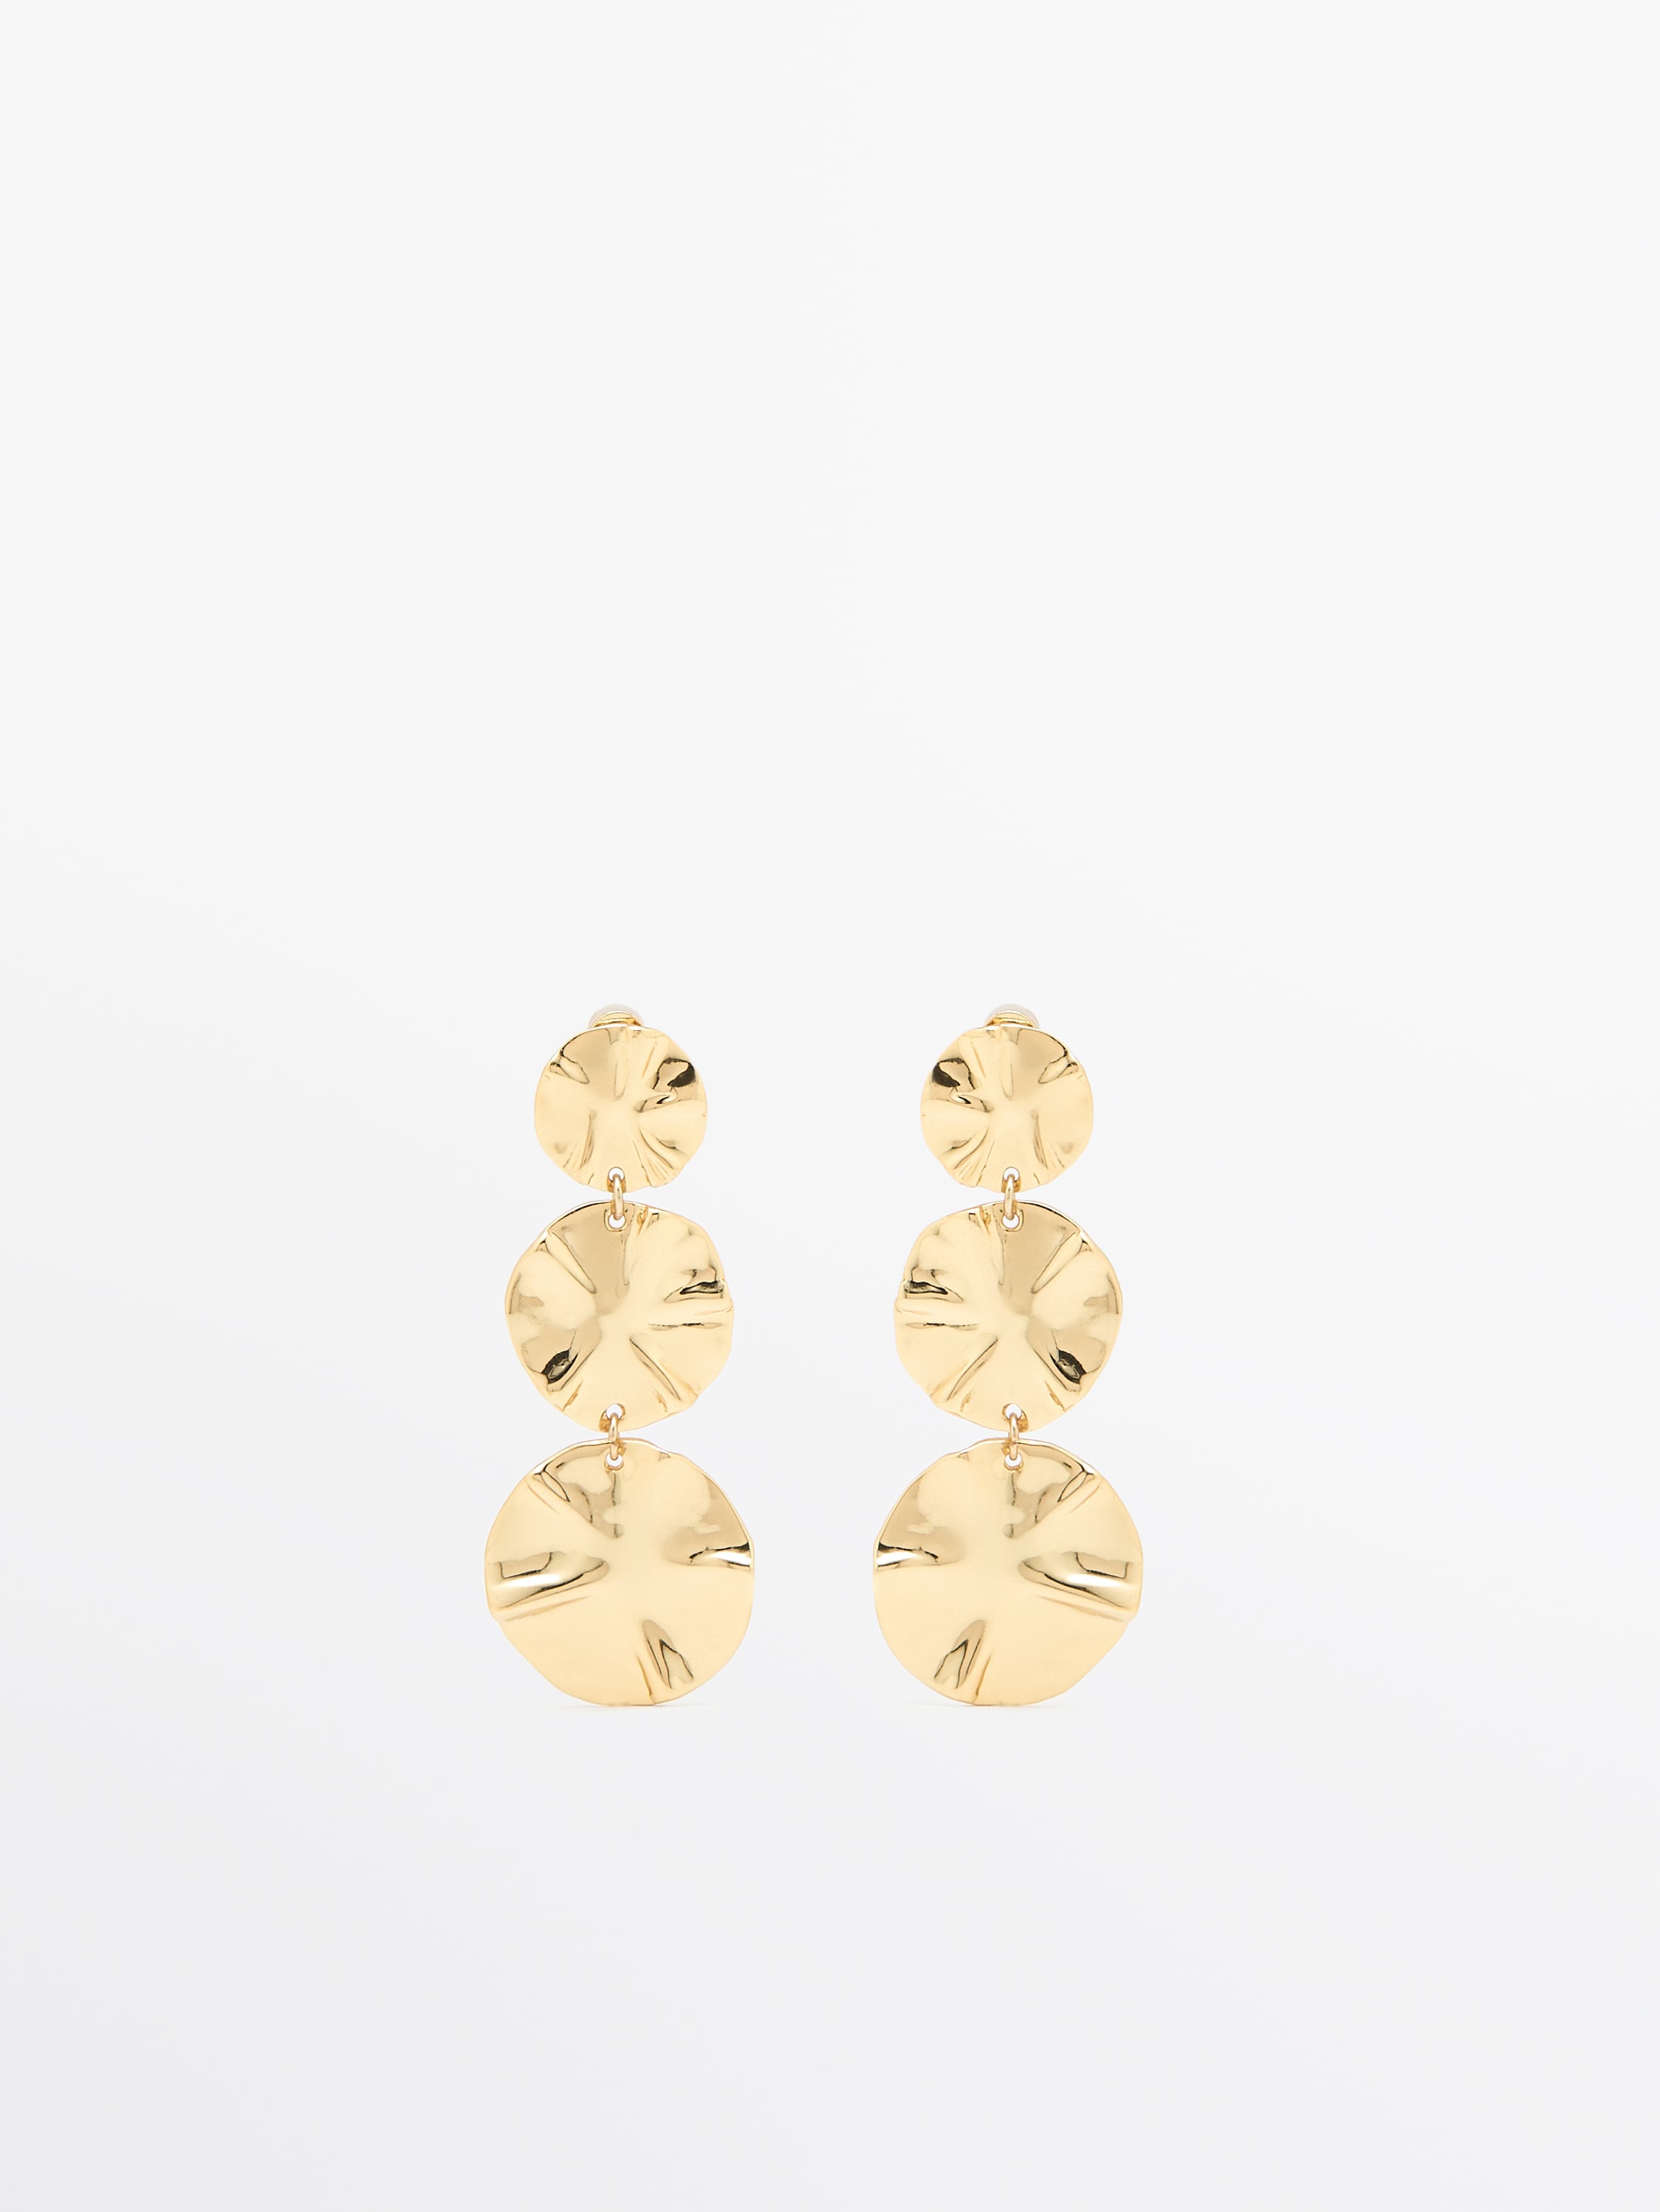 Climber earrings with textured detail